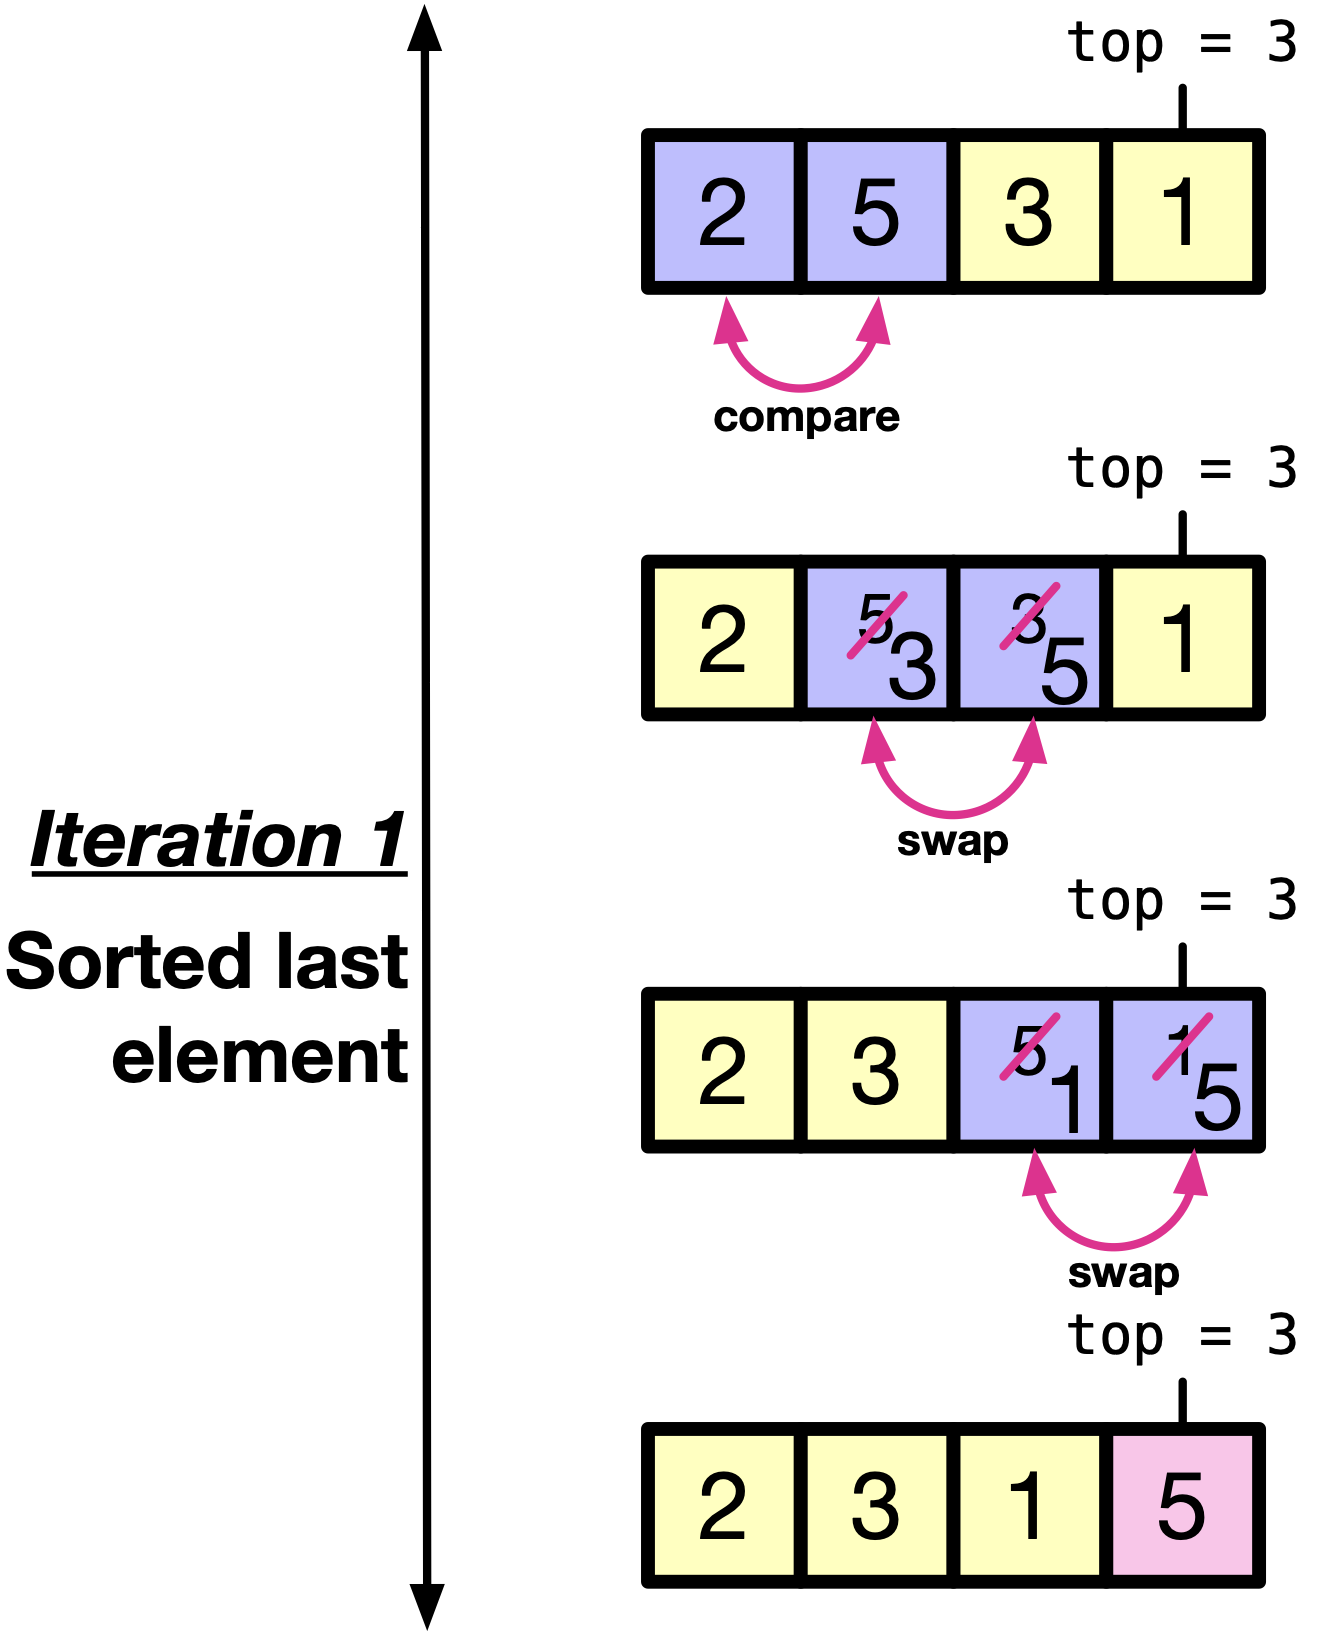 first-iter-bubble-sort